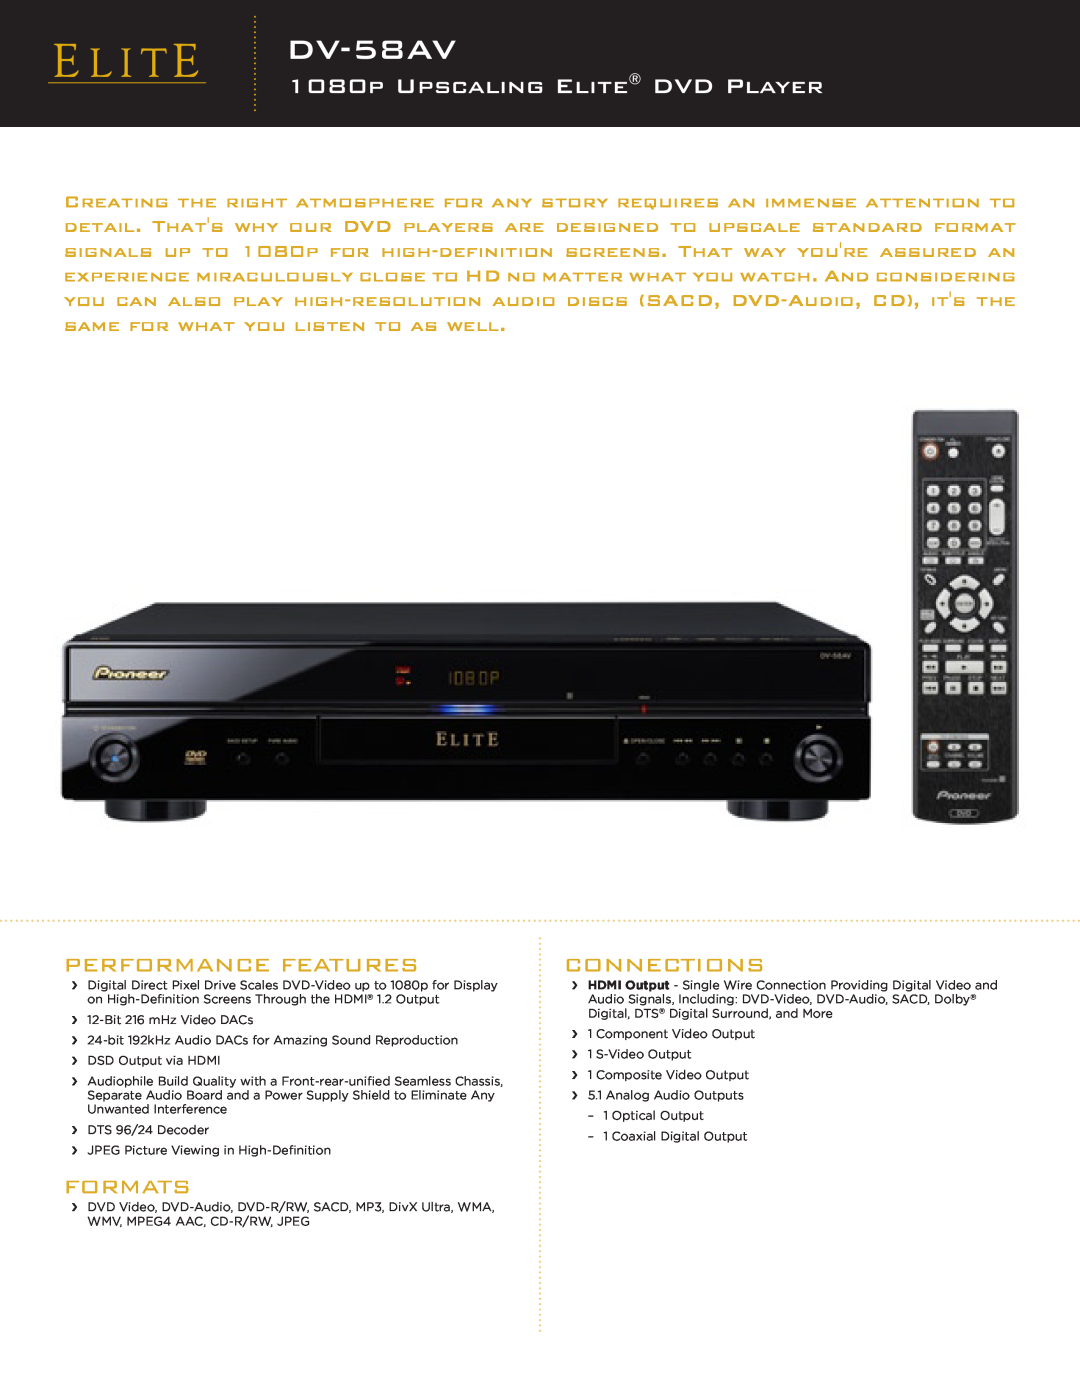 Elite DV-58AV manual 1080P UPSCALING ELITE DVD PLAYER, Performance Features, Formats, Connections 